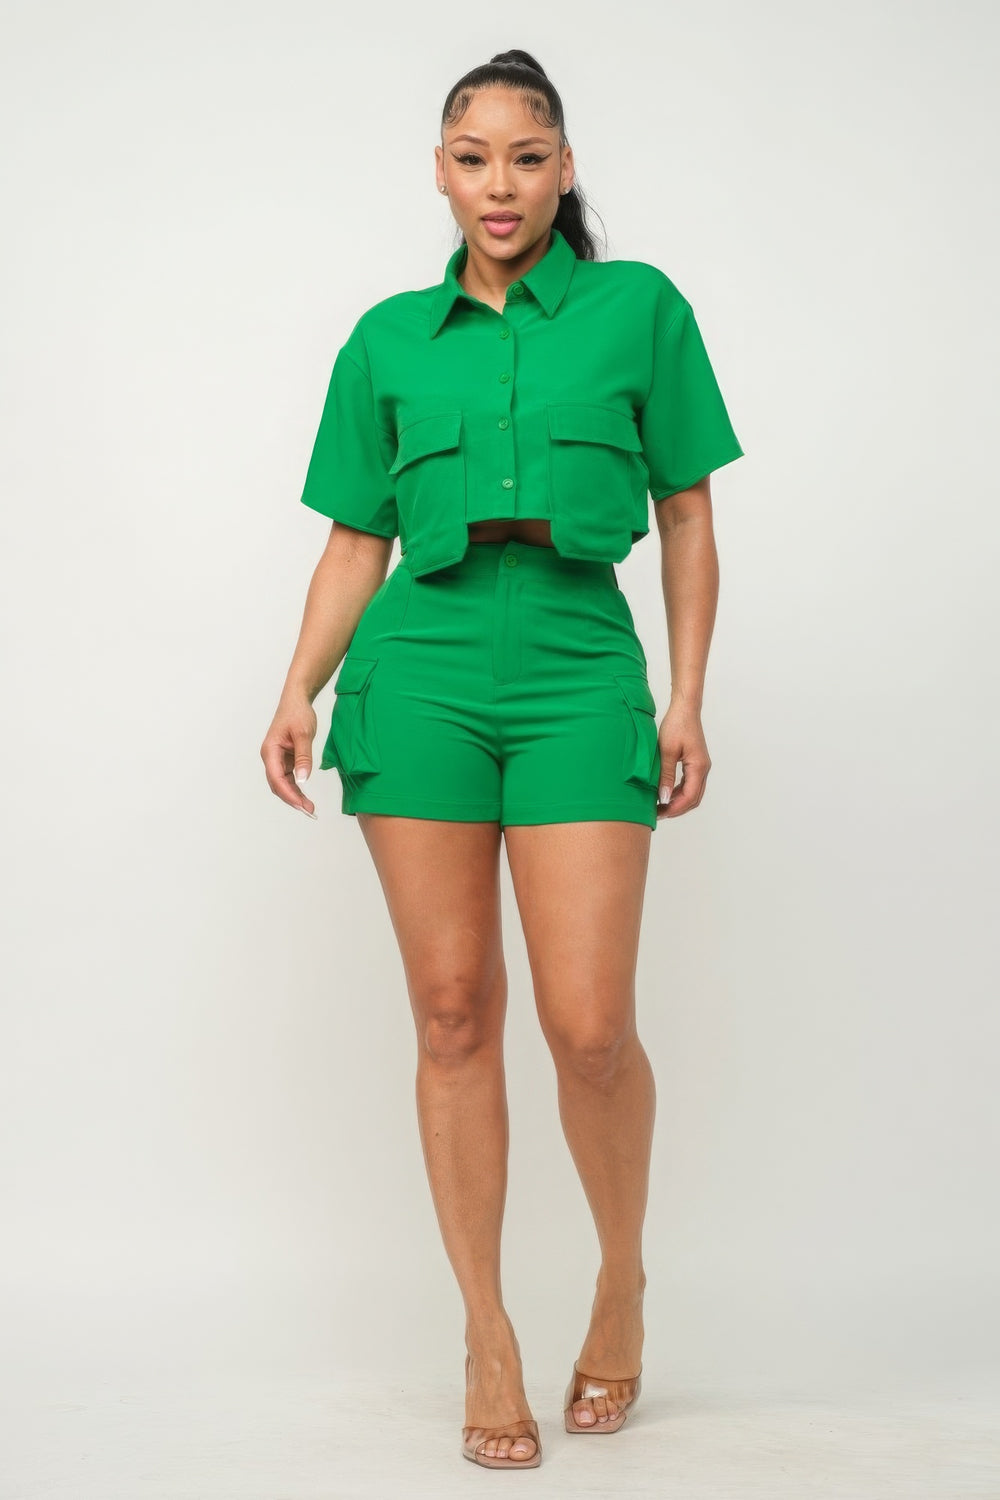 Front Button Down Side Pockets Top And Shorts Set - bertofonsi